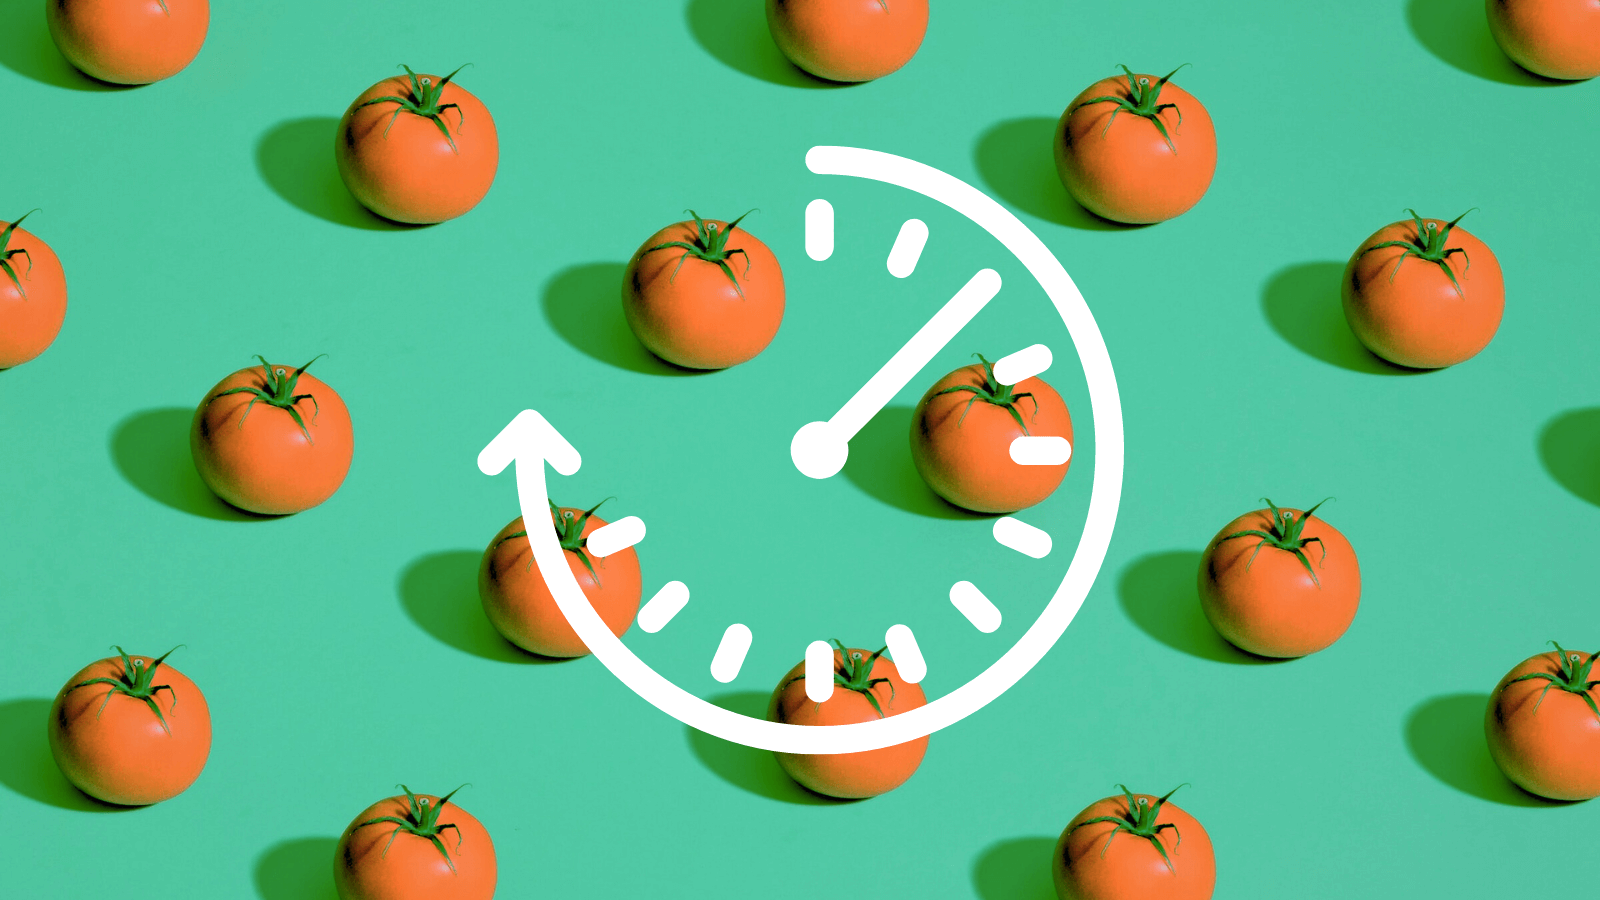 ADHD productivity hack: How to use the Pomodoro method to get things done